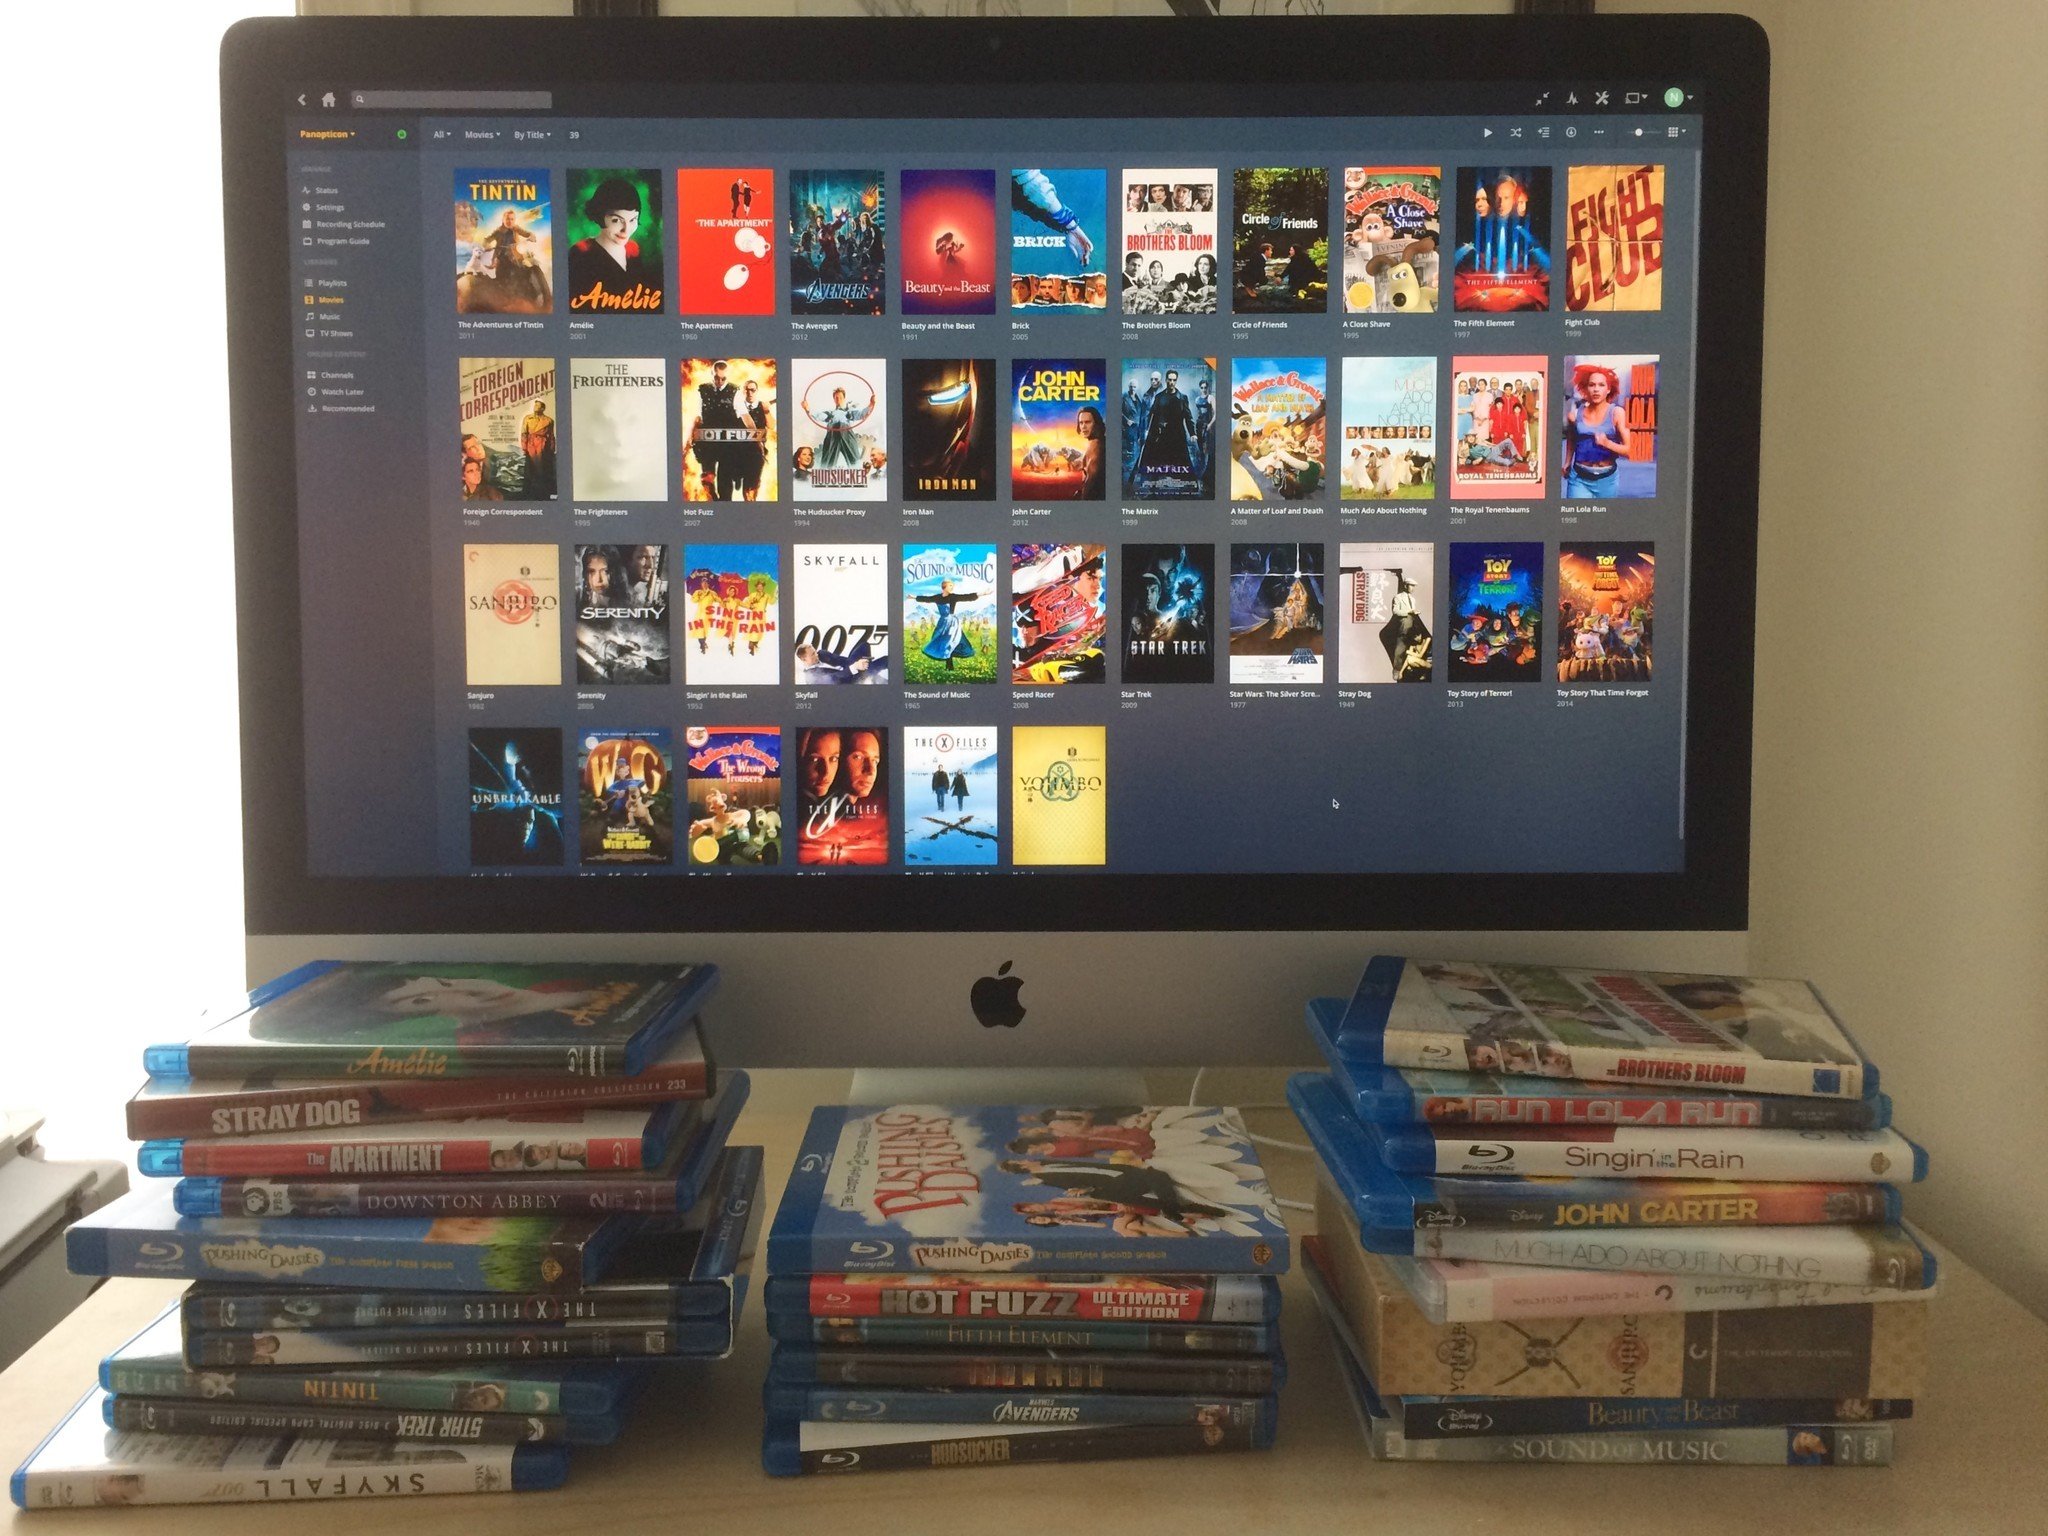 With a little effort and a good chunk of time, you can convert your Blu-rays to convenient digital copies.